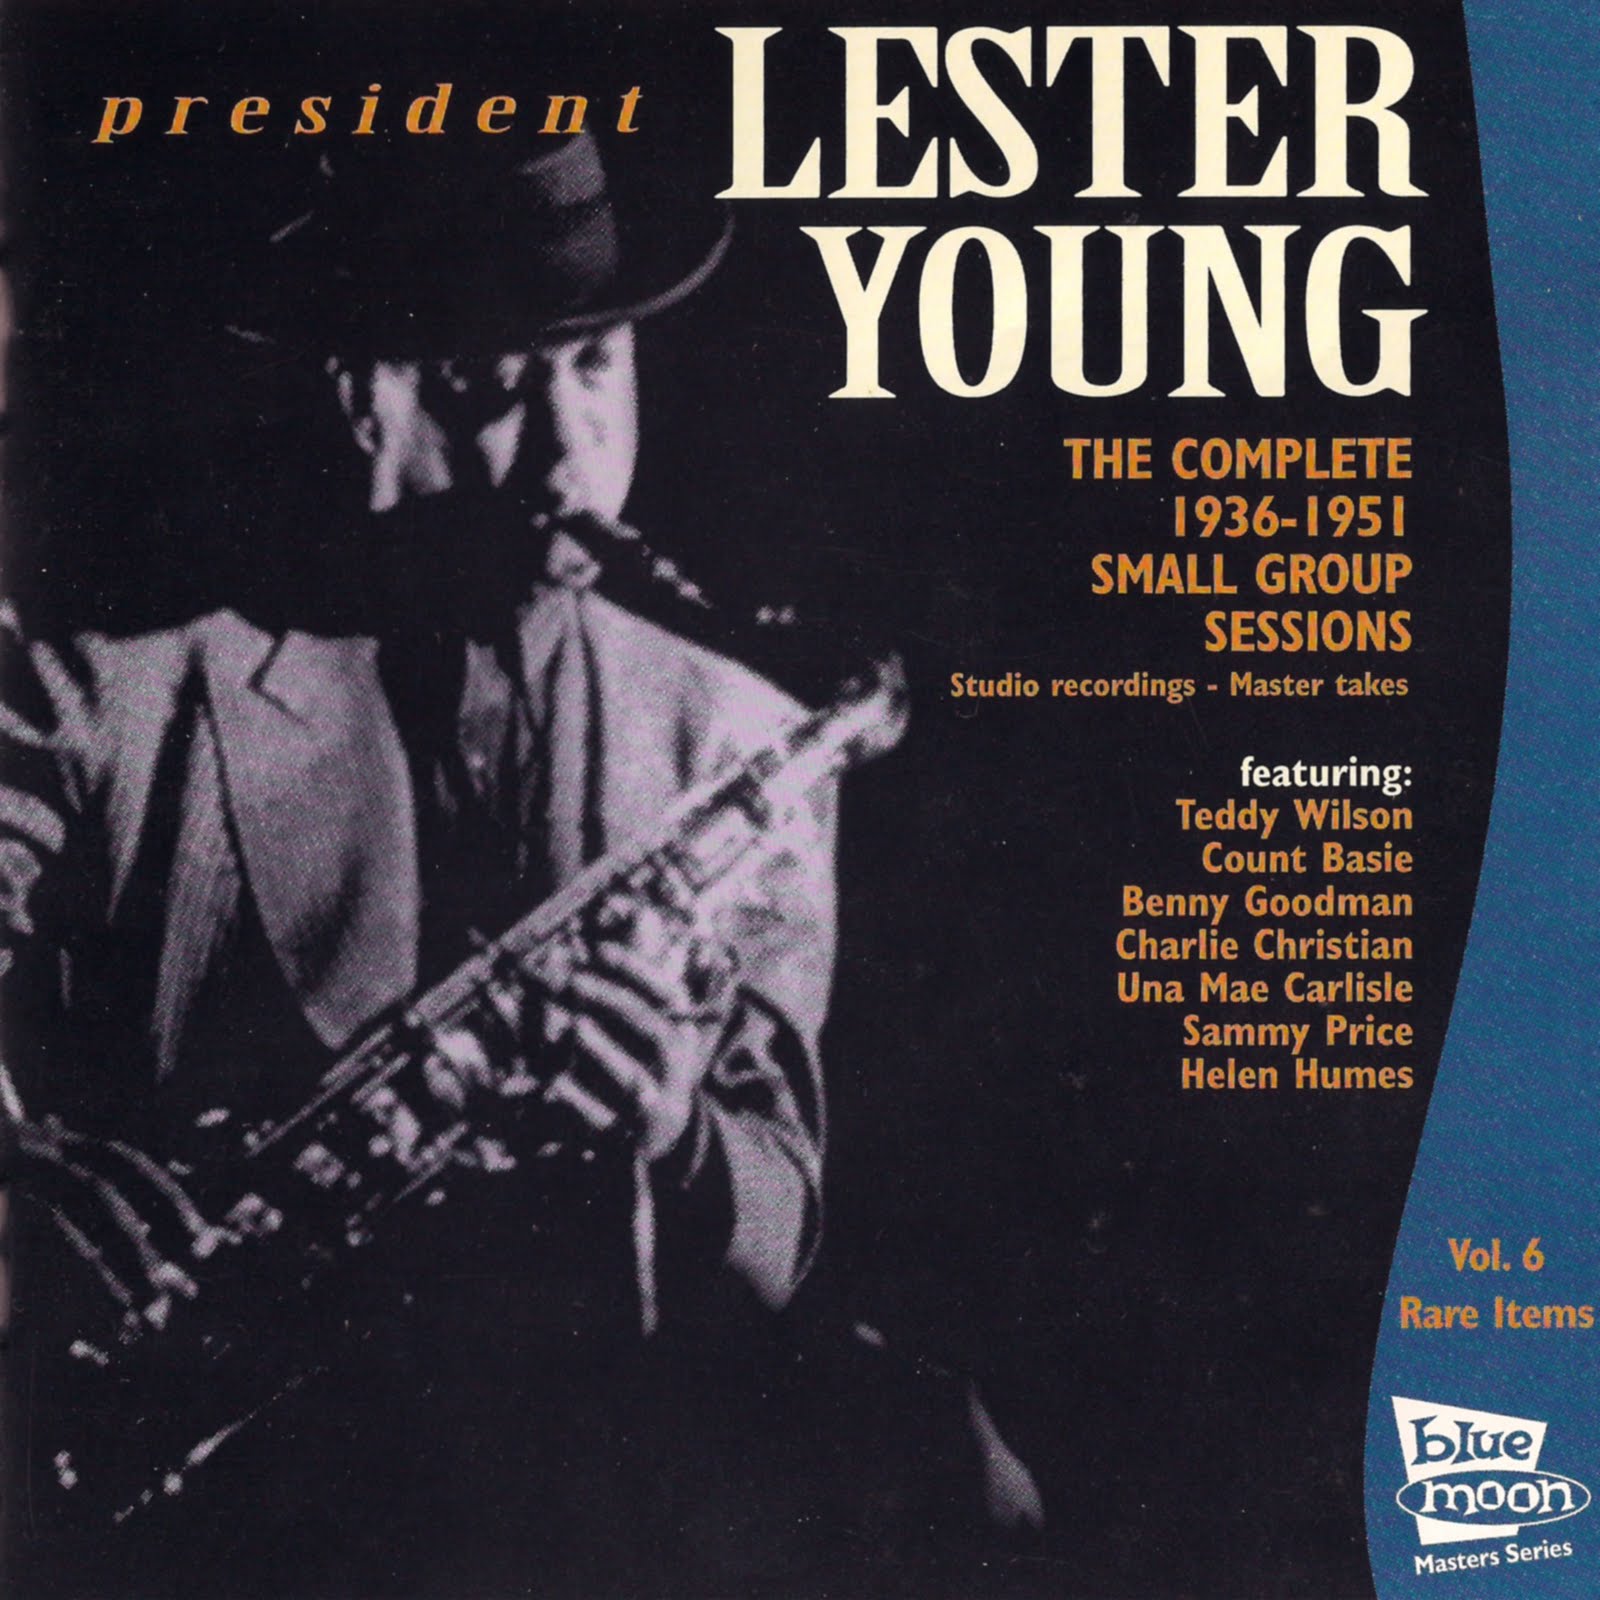 LESTER YOUNG / レスター・ヤング商品一覧｜JAZZ｜ディスクユニオン 